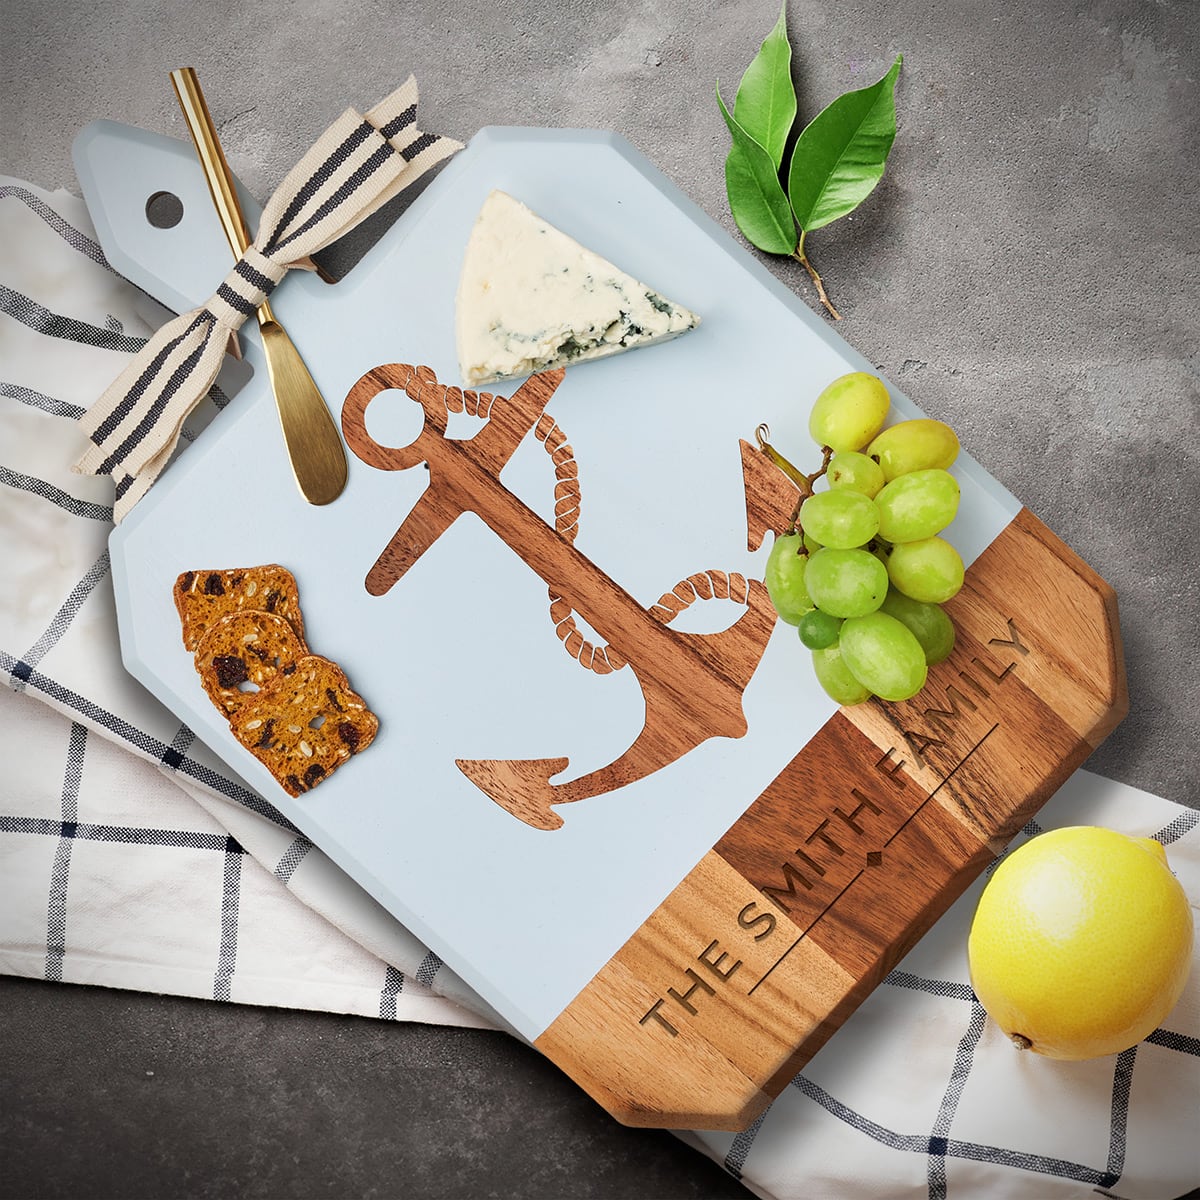 Anchors Away Personalized Cheese Board Set with Spreader Knife